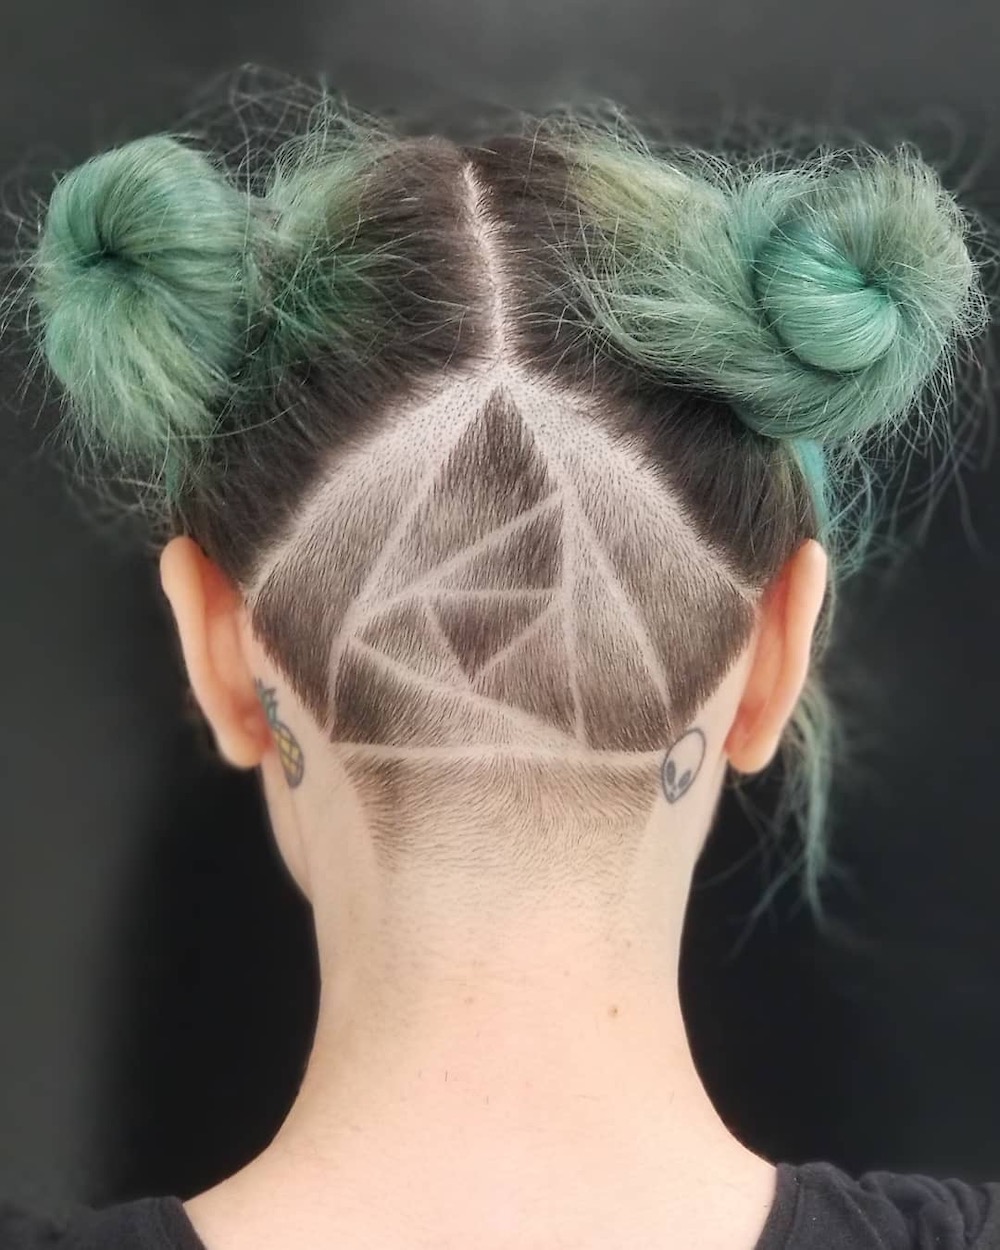 How to Do Undercut Hair for Women: 11 Steps (with Pictures)